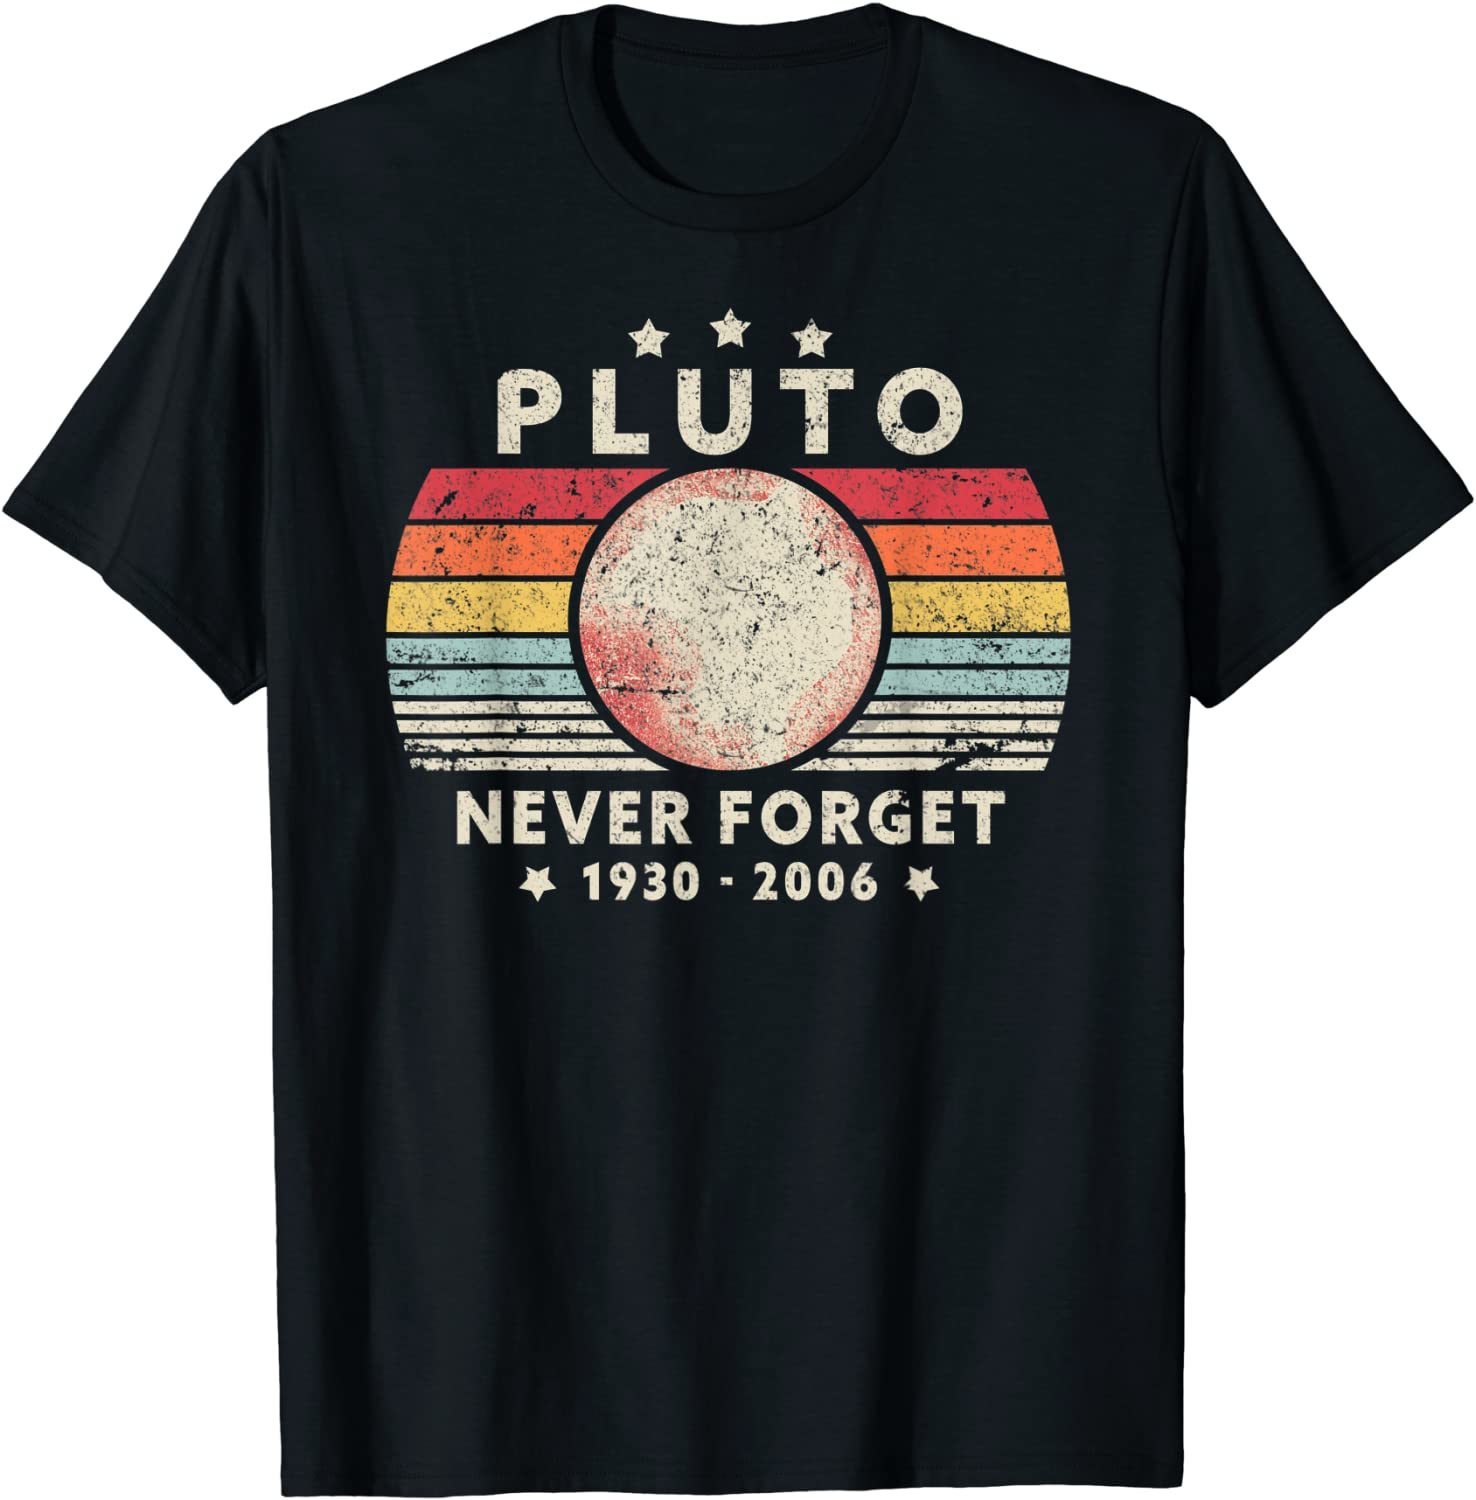 

Men's T-Shirts T Shirt Men Summer Tops Tees Tee Shirt Male Never Forget Pluto Shirt. Retro Style Funny Space Science T-Shirt 230420, 10